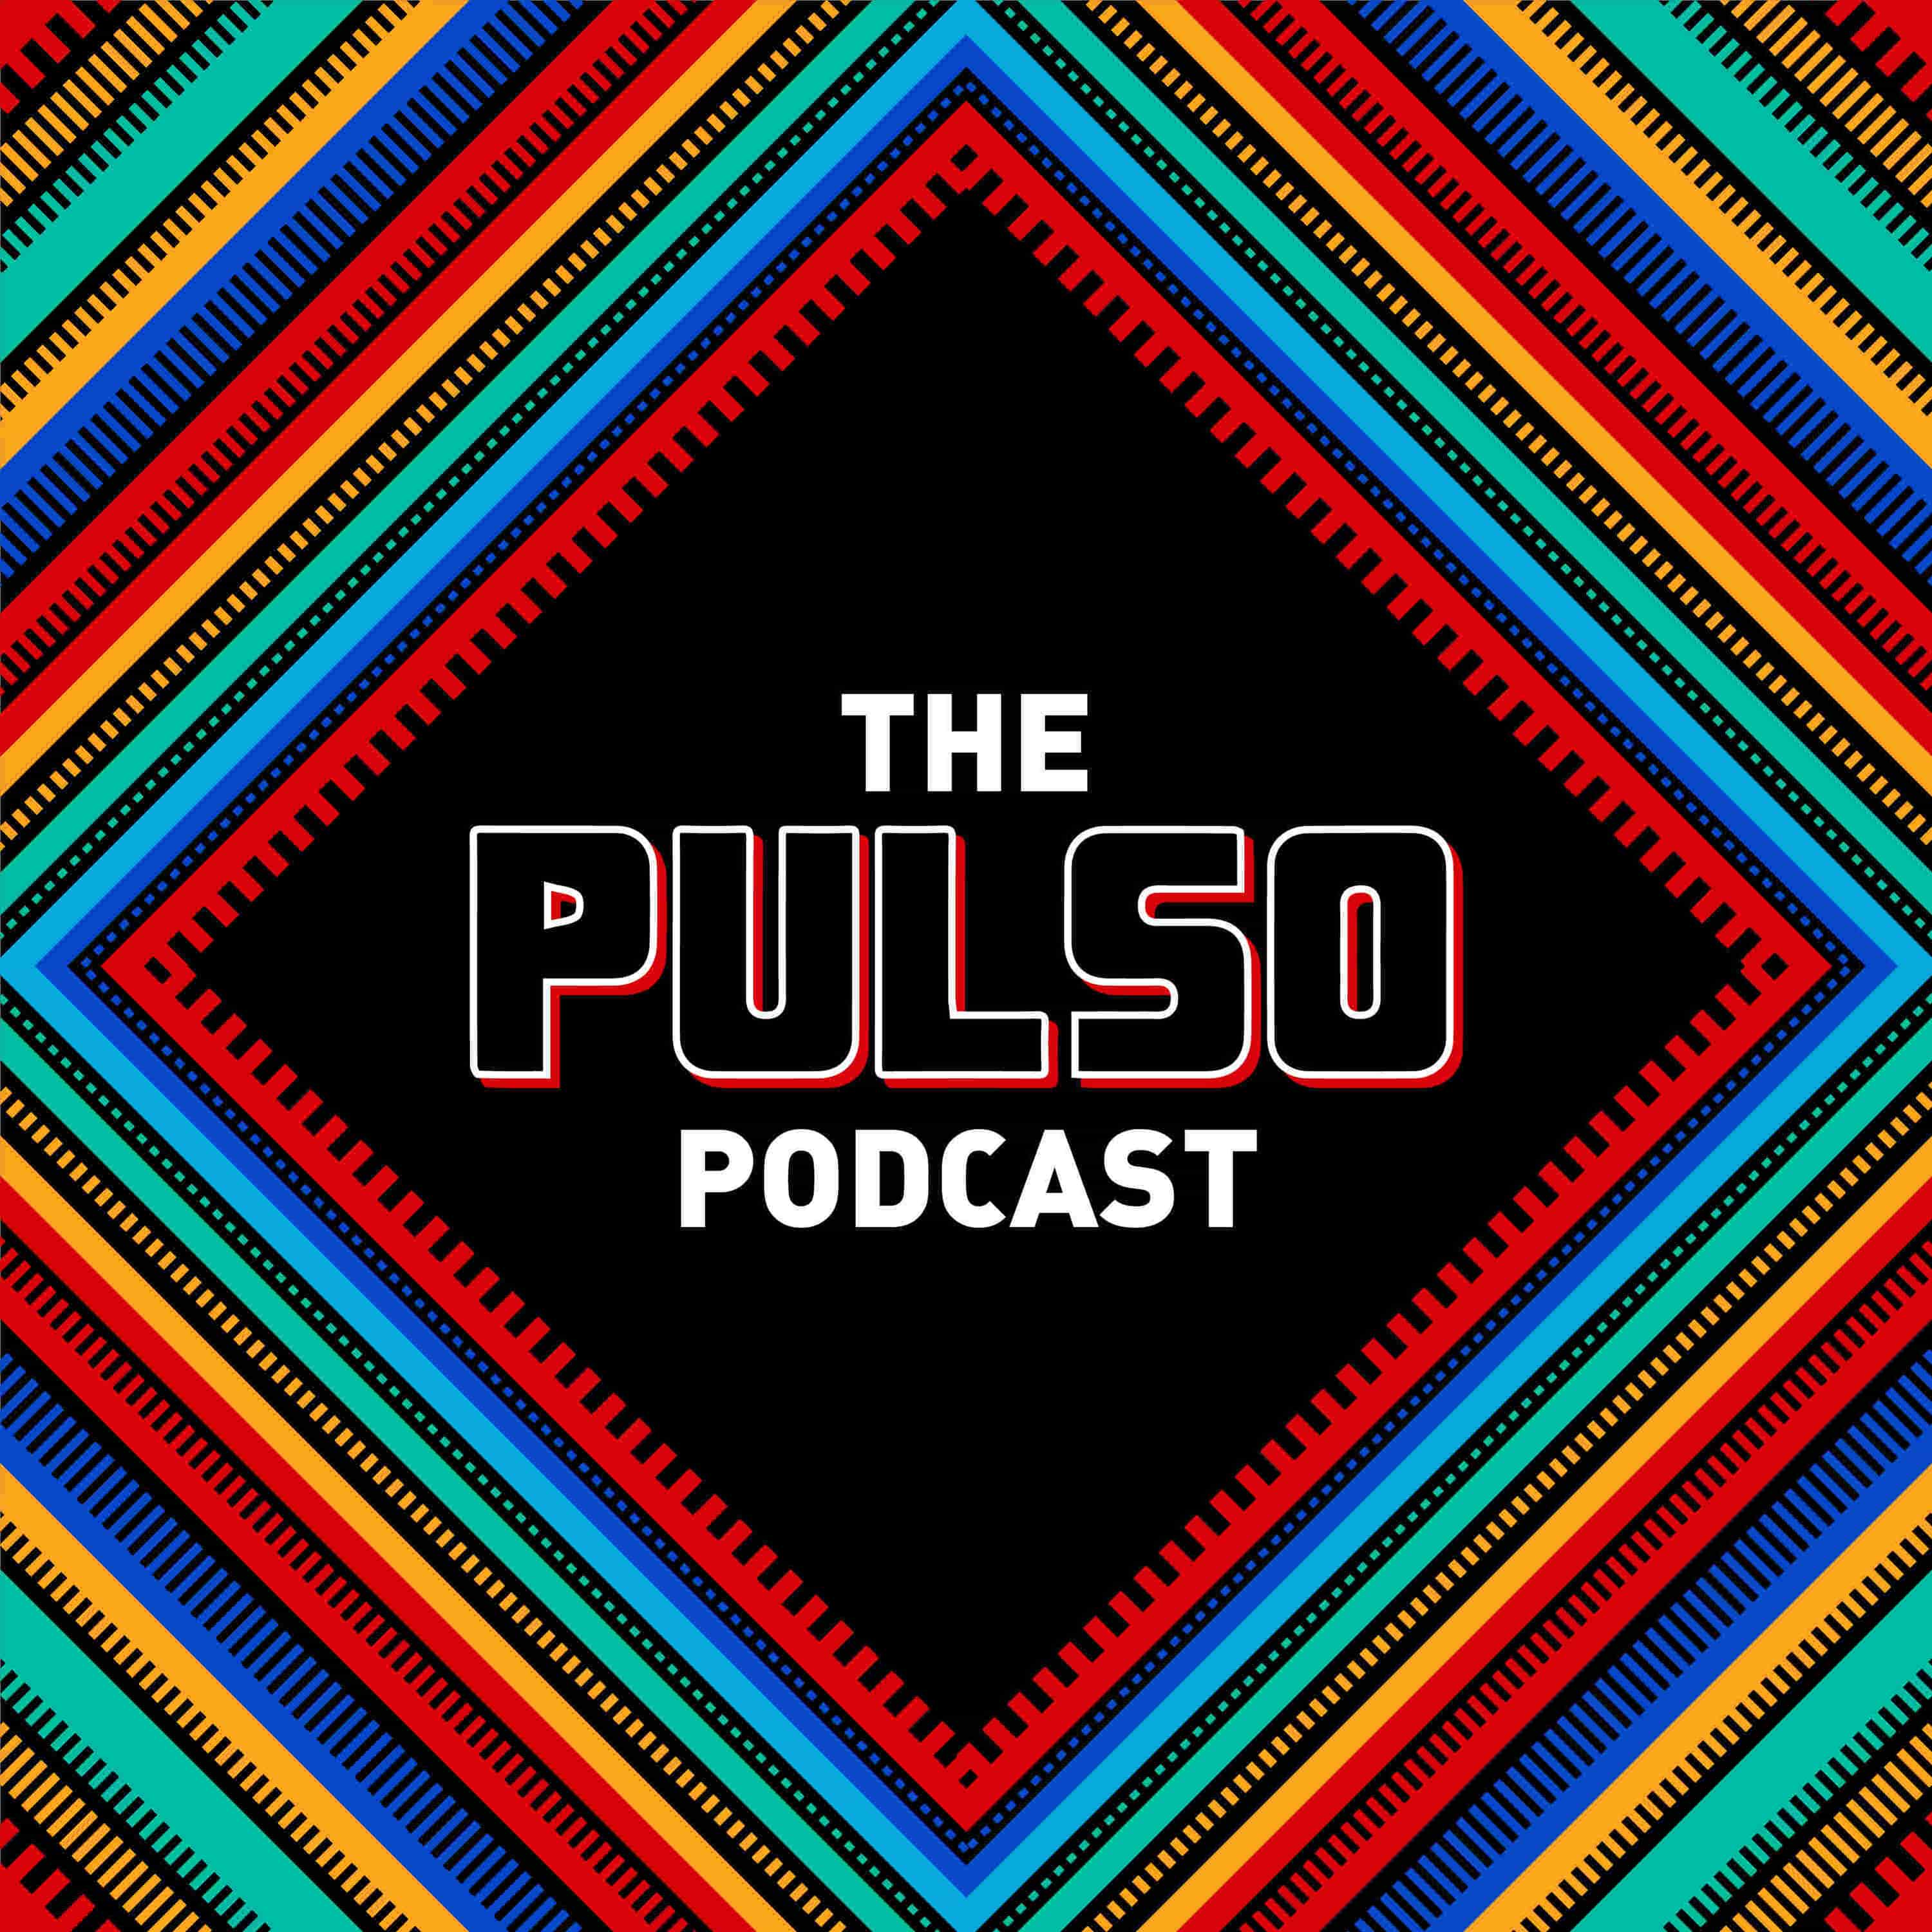 Artwork for podcast The Pulso Podcast